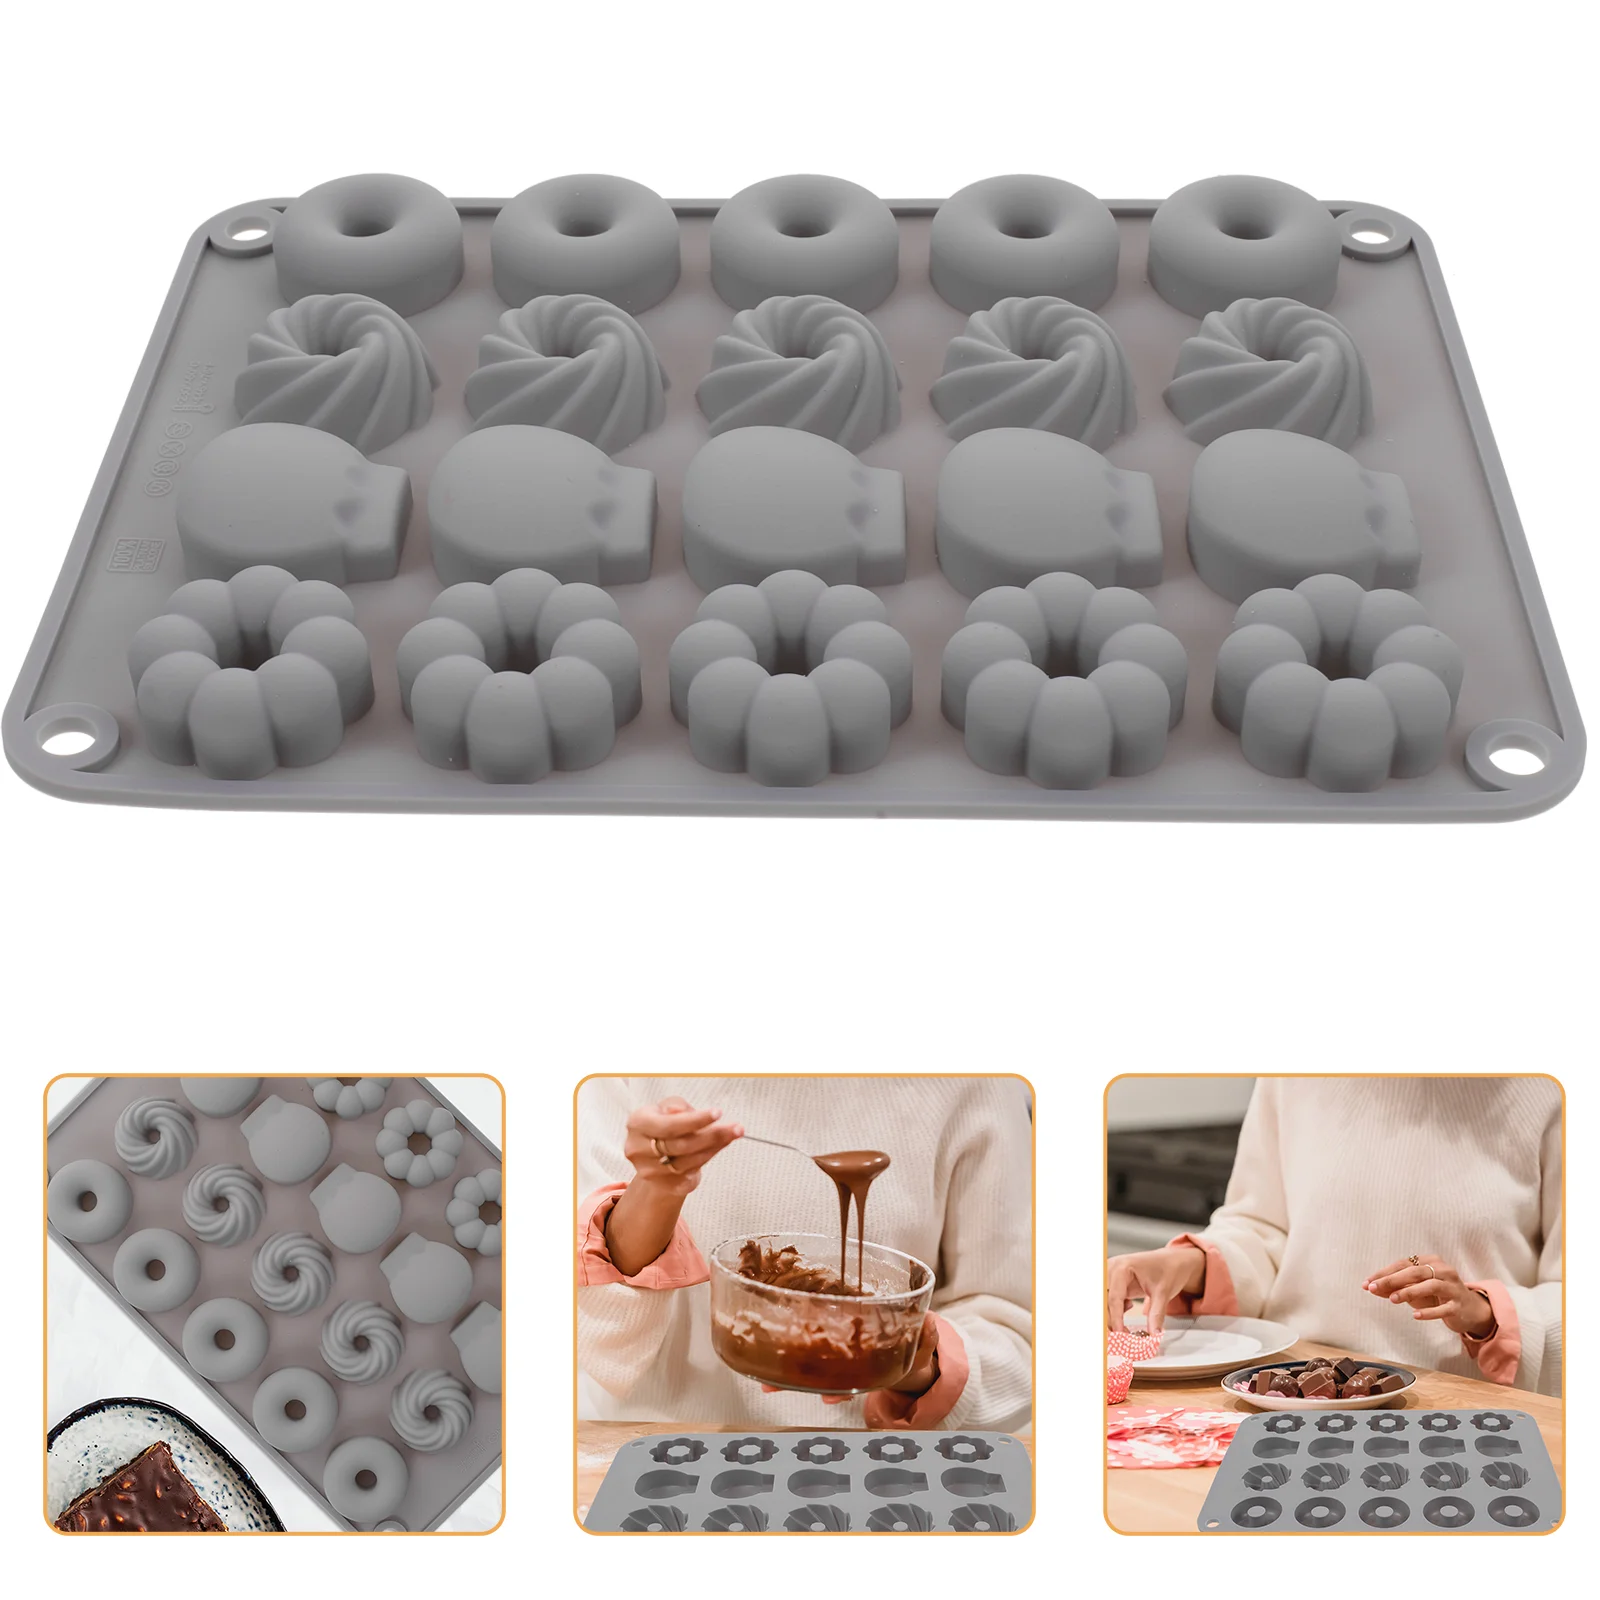 

Chocolate Mold Party Candy Heat Resistant Sweets Maker DIY Fudge Supply Cooking Jelly Dessert